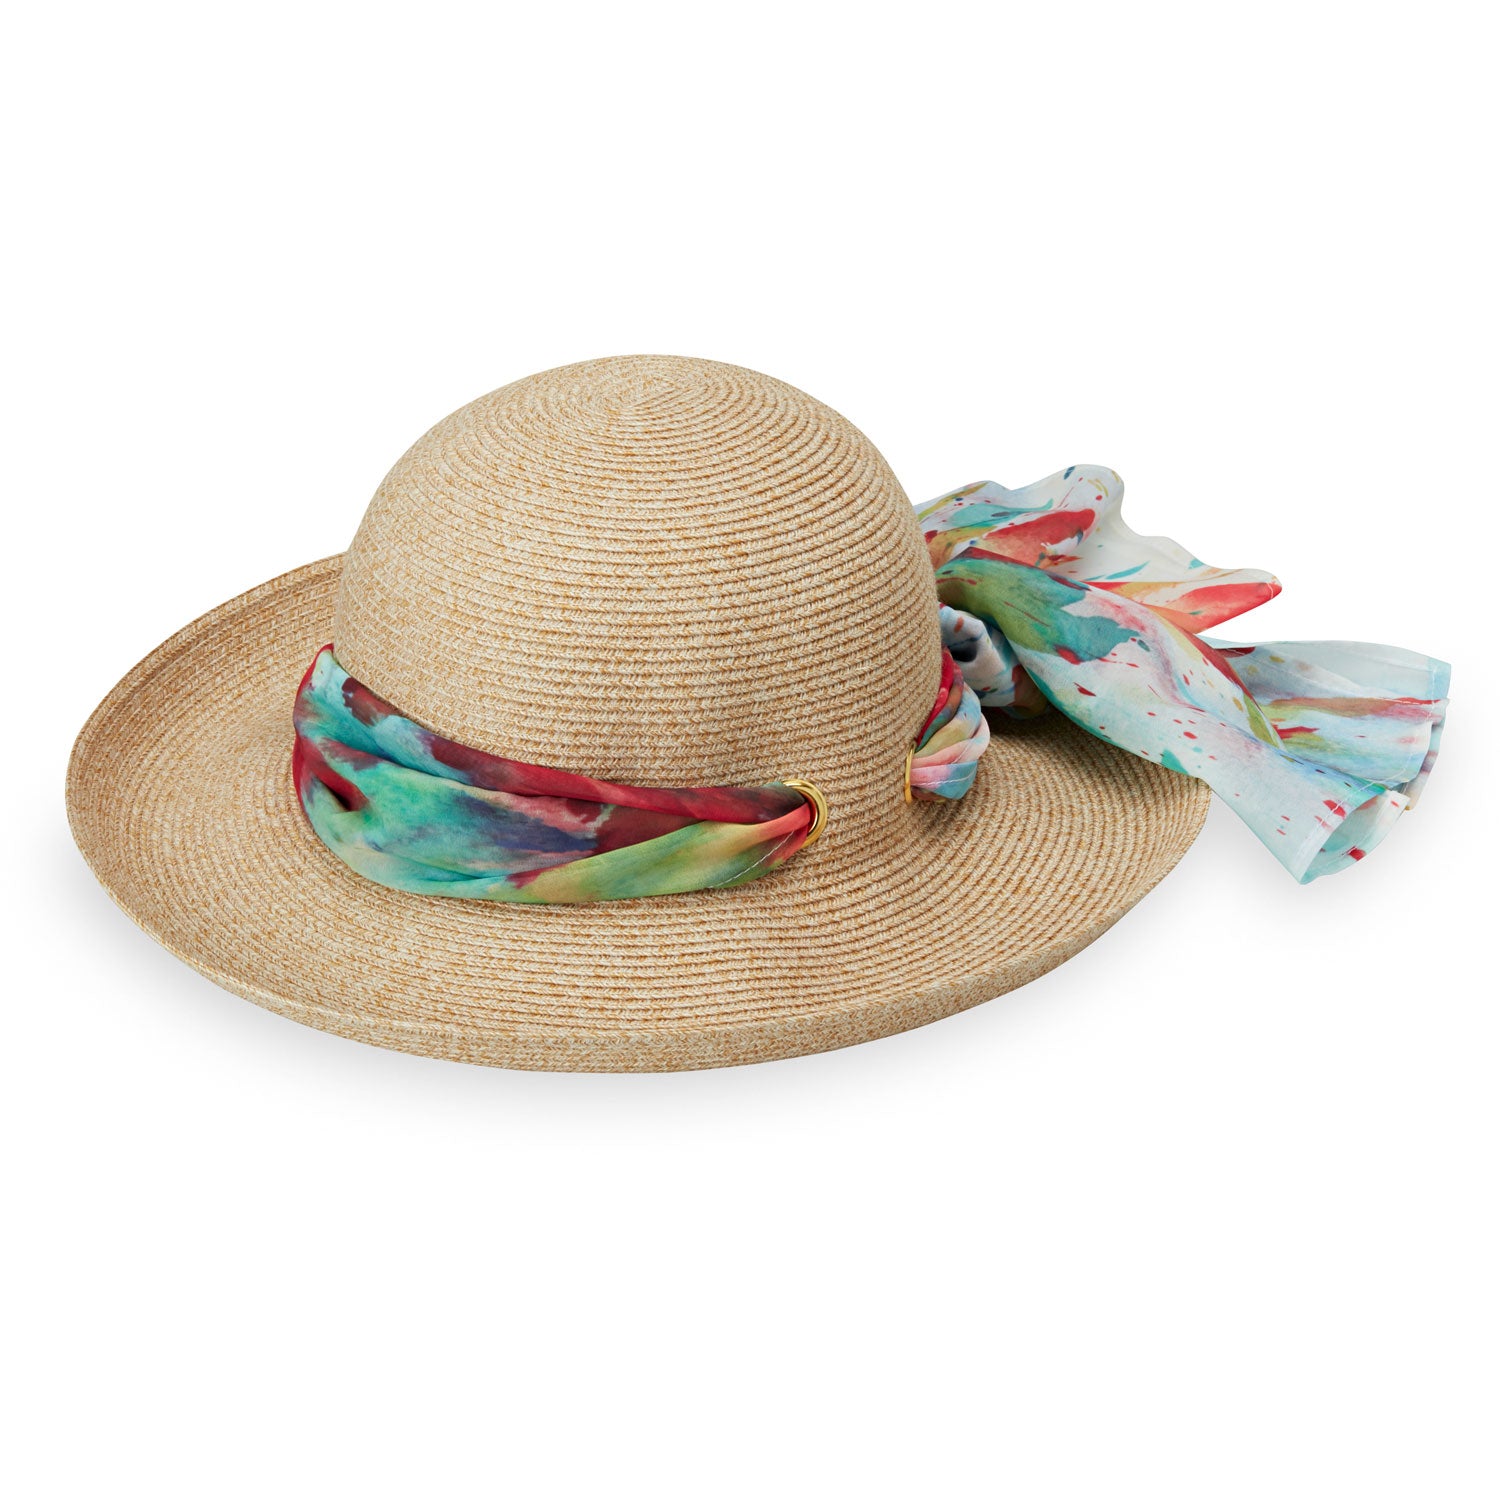 Featuring Front of Women's UPF Wide Brim Crown Style Lady Jane Sun Hat in Natural with Scarf from Wallaroo